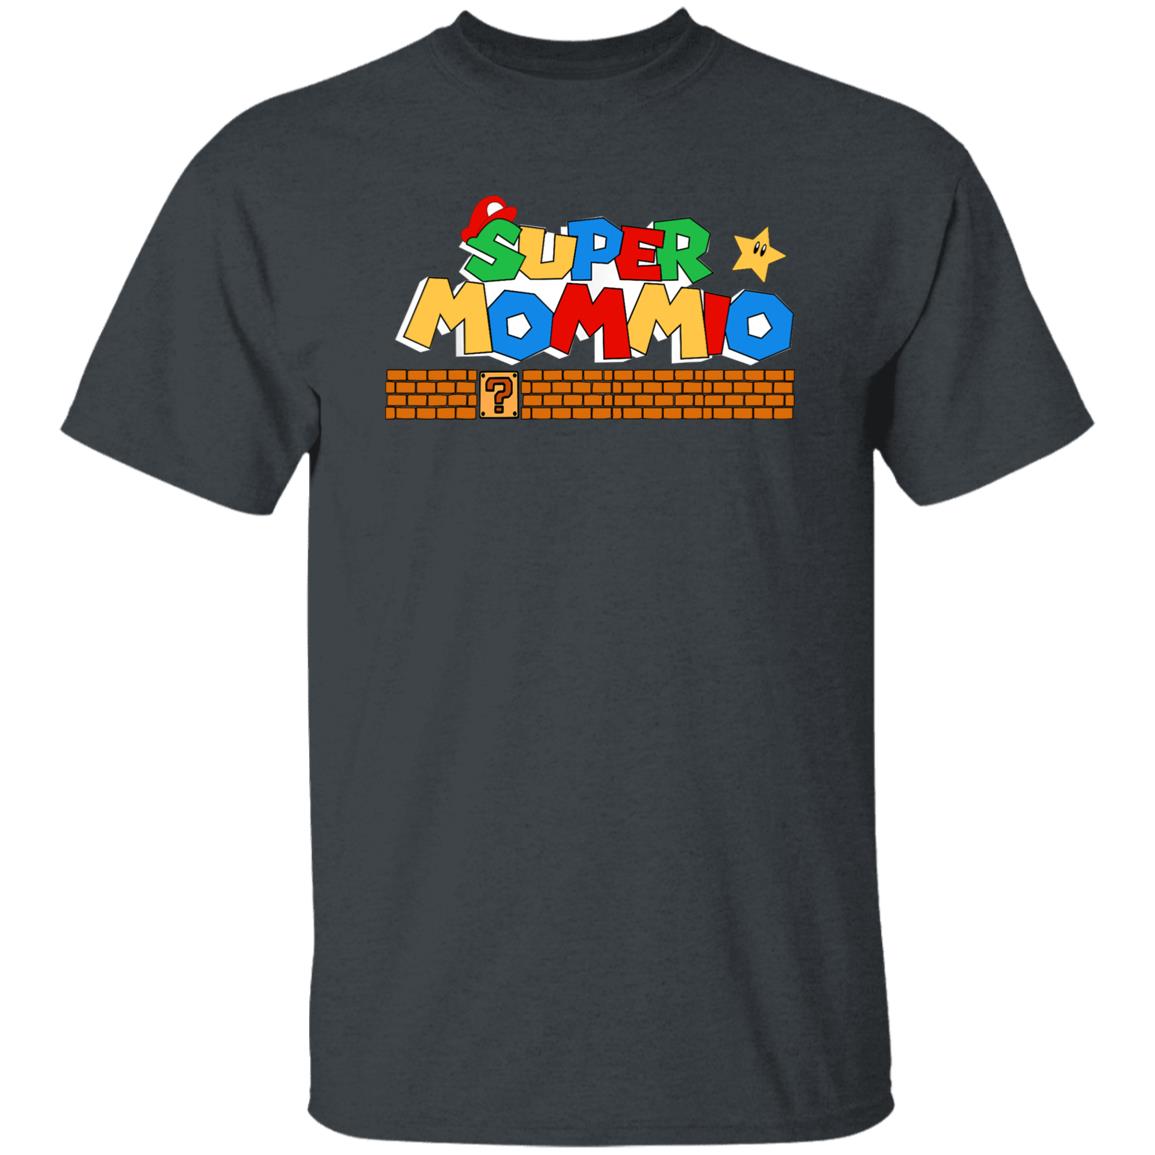 Super Mommio Shirt Funny Mother's day Video Gaming Shirt